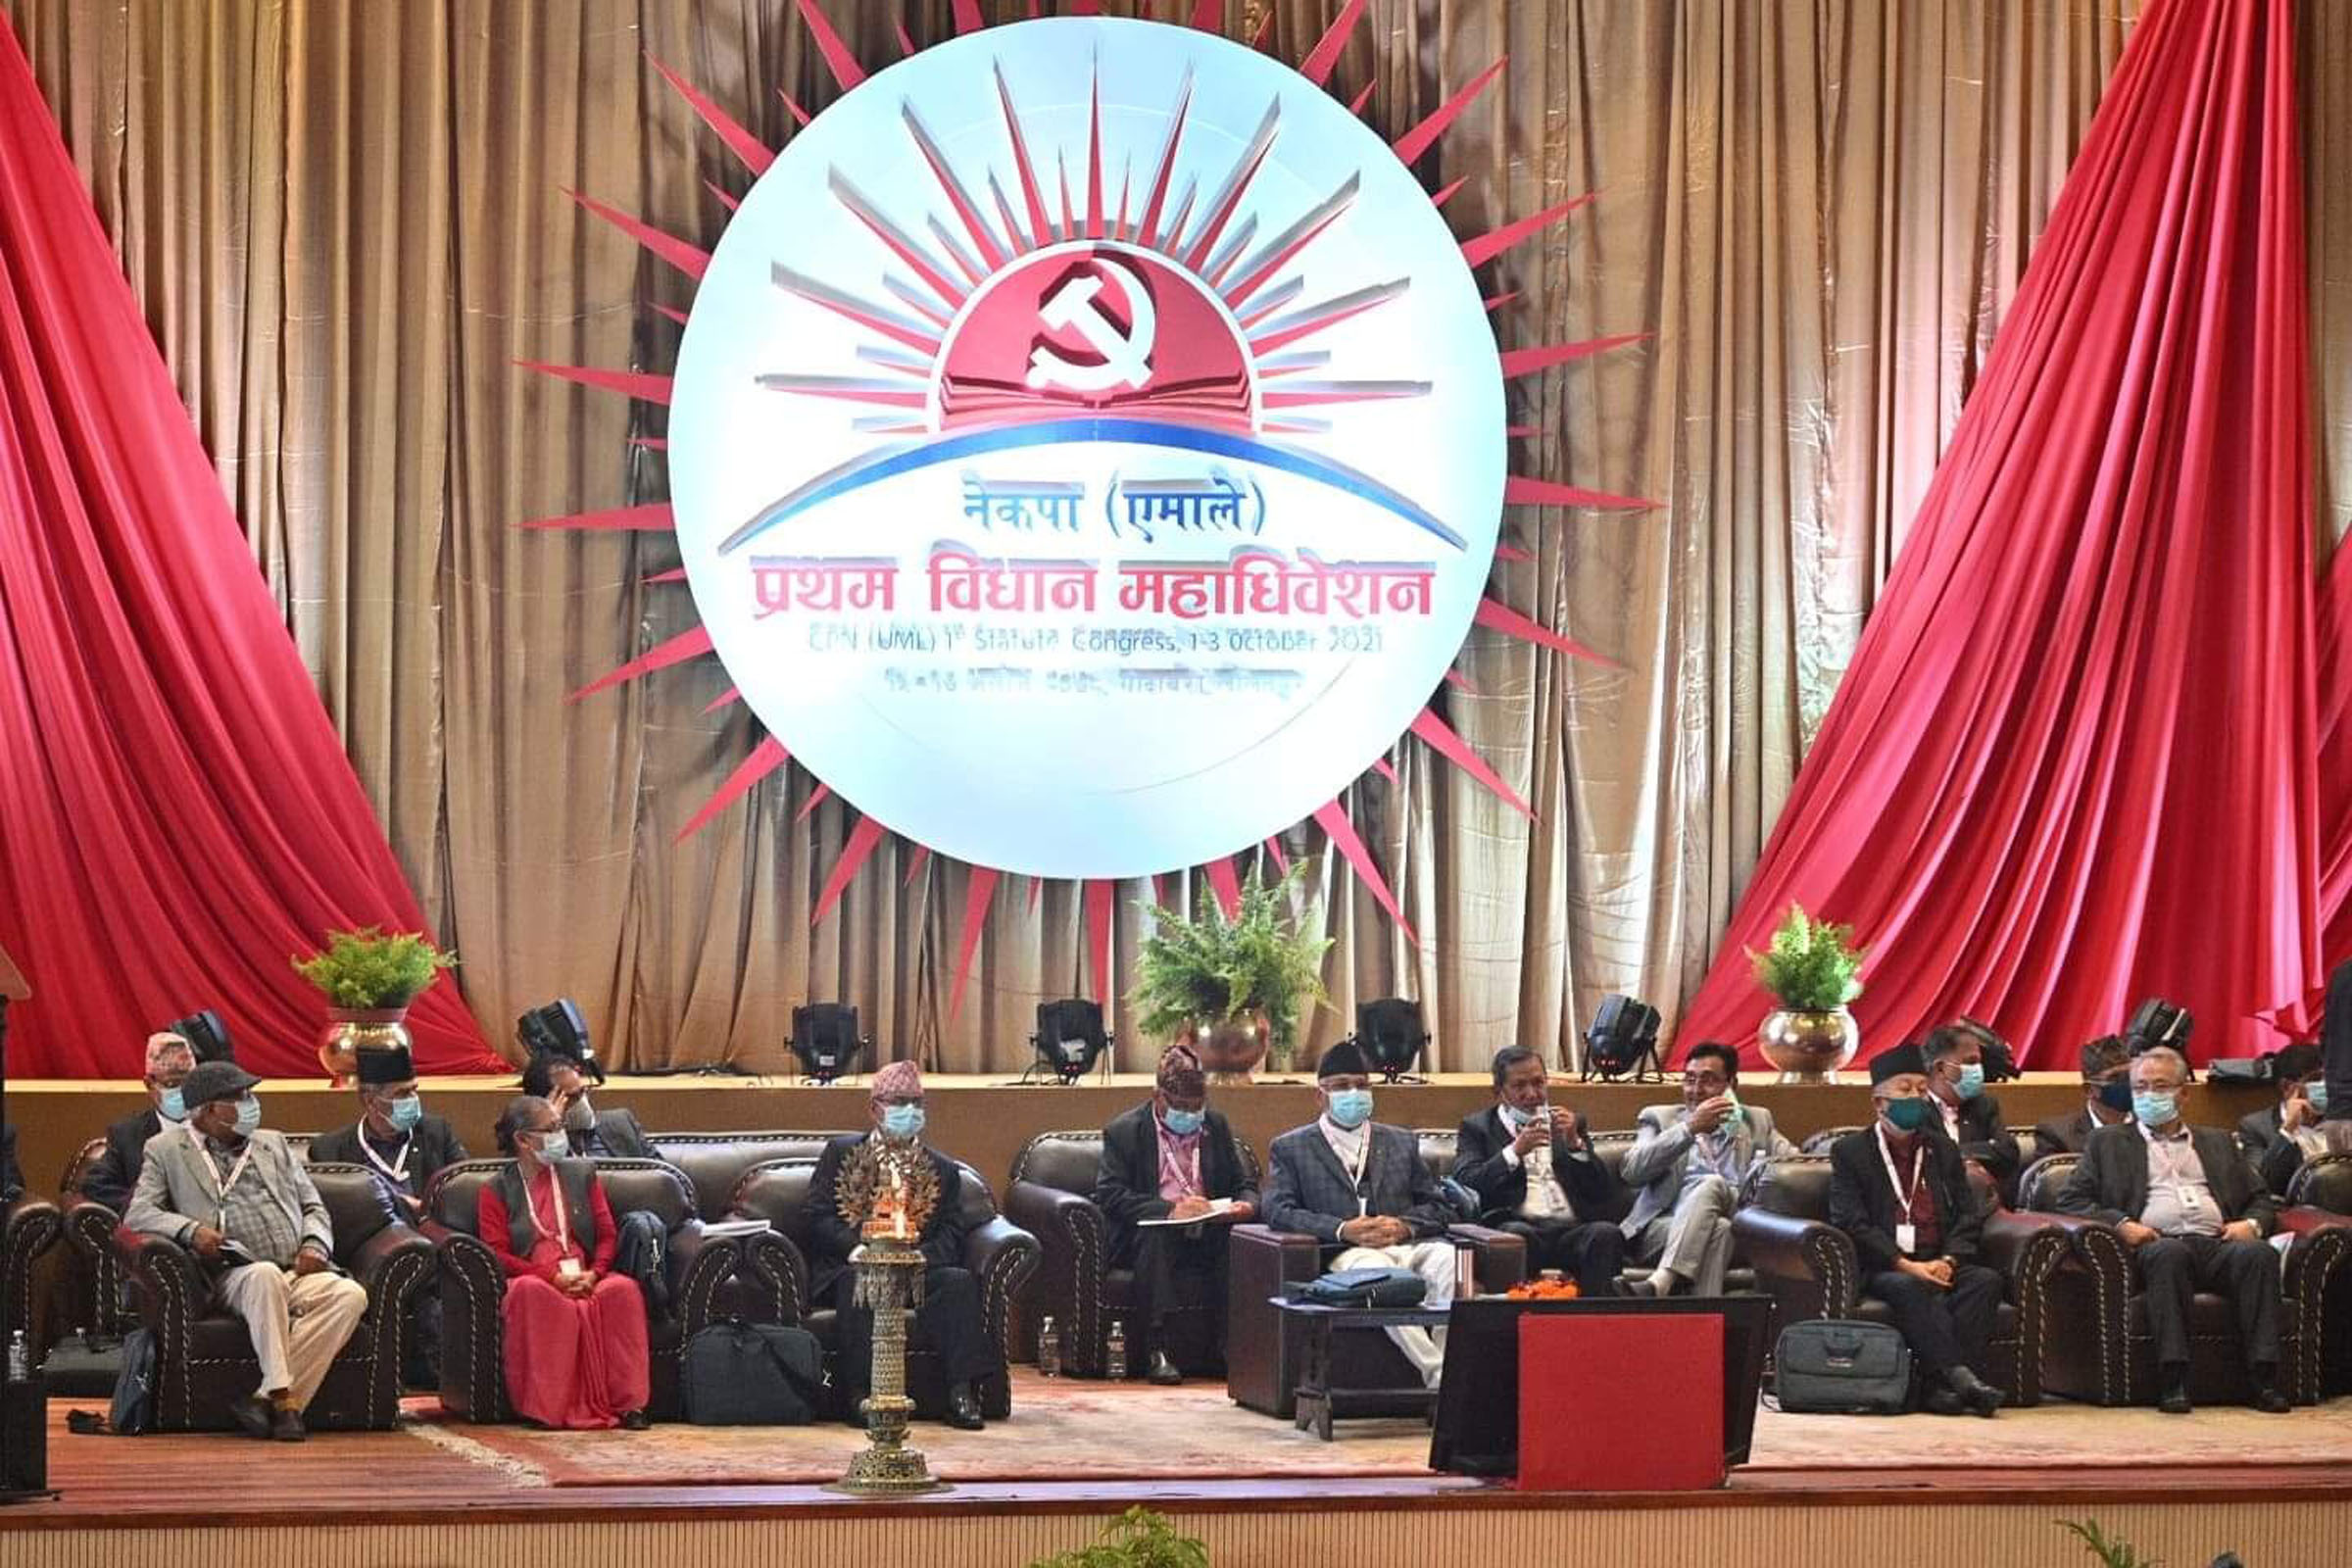 UML Legislative General Convention: Will end today after Chairman Oli gives an answer